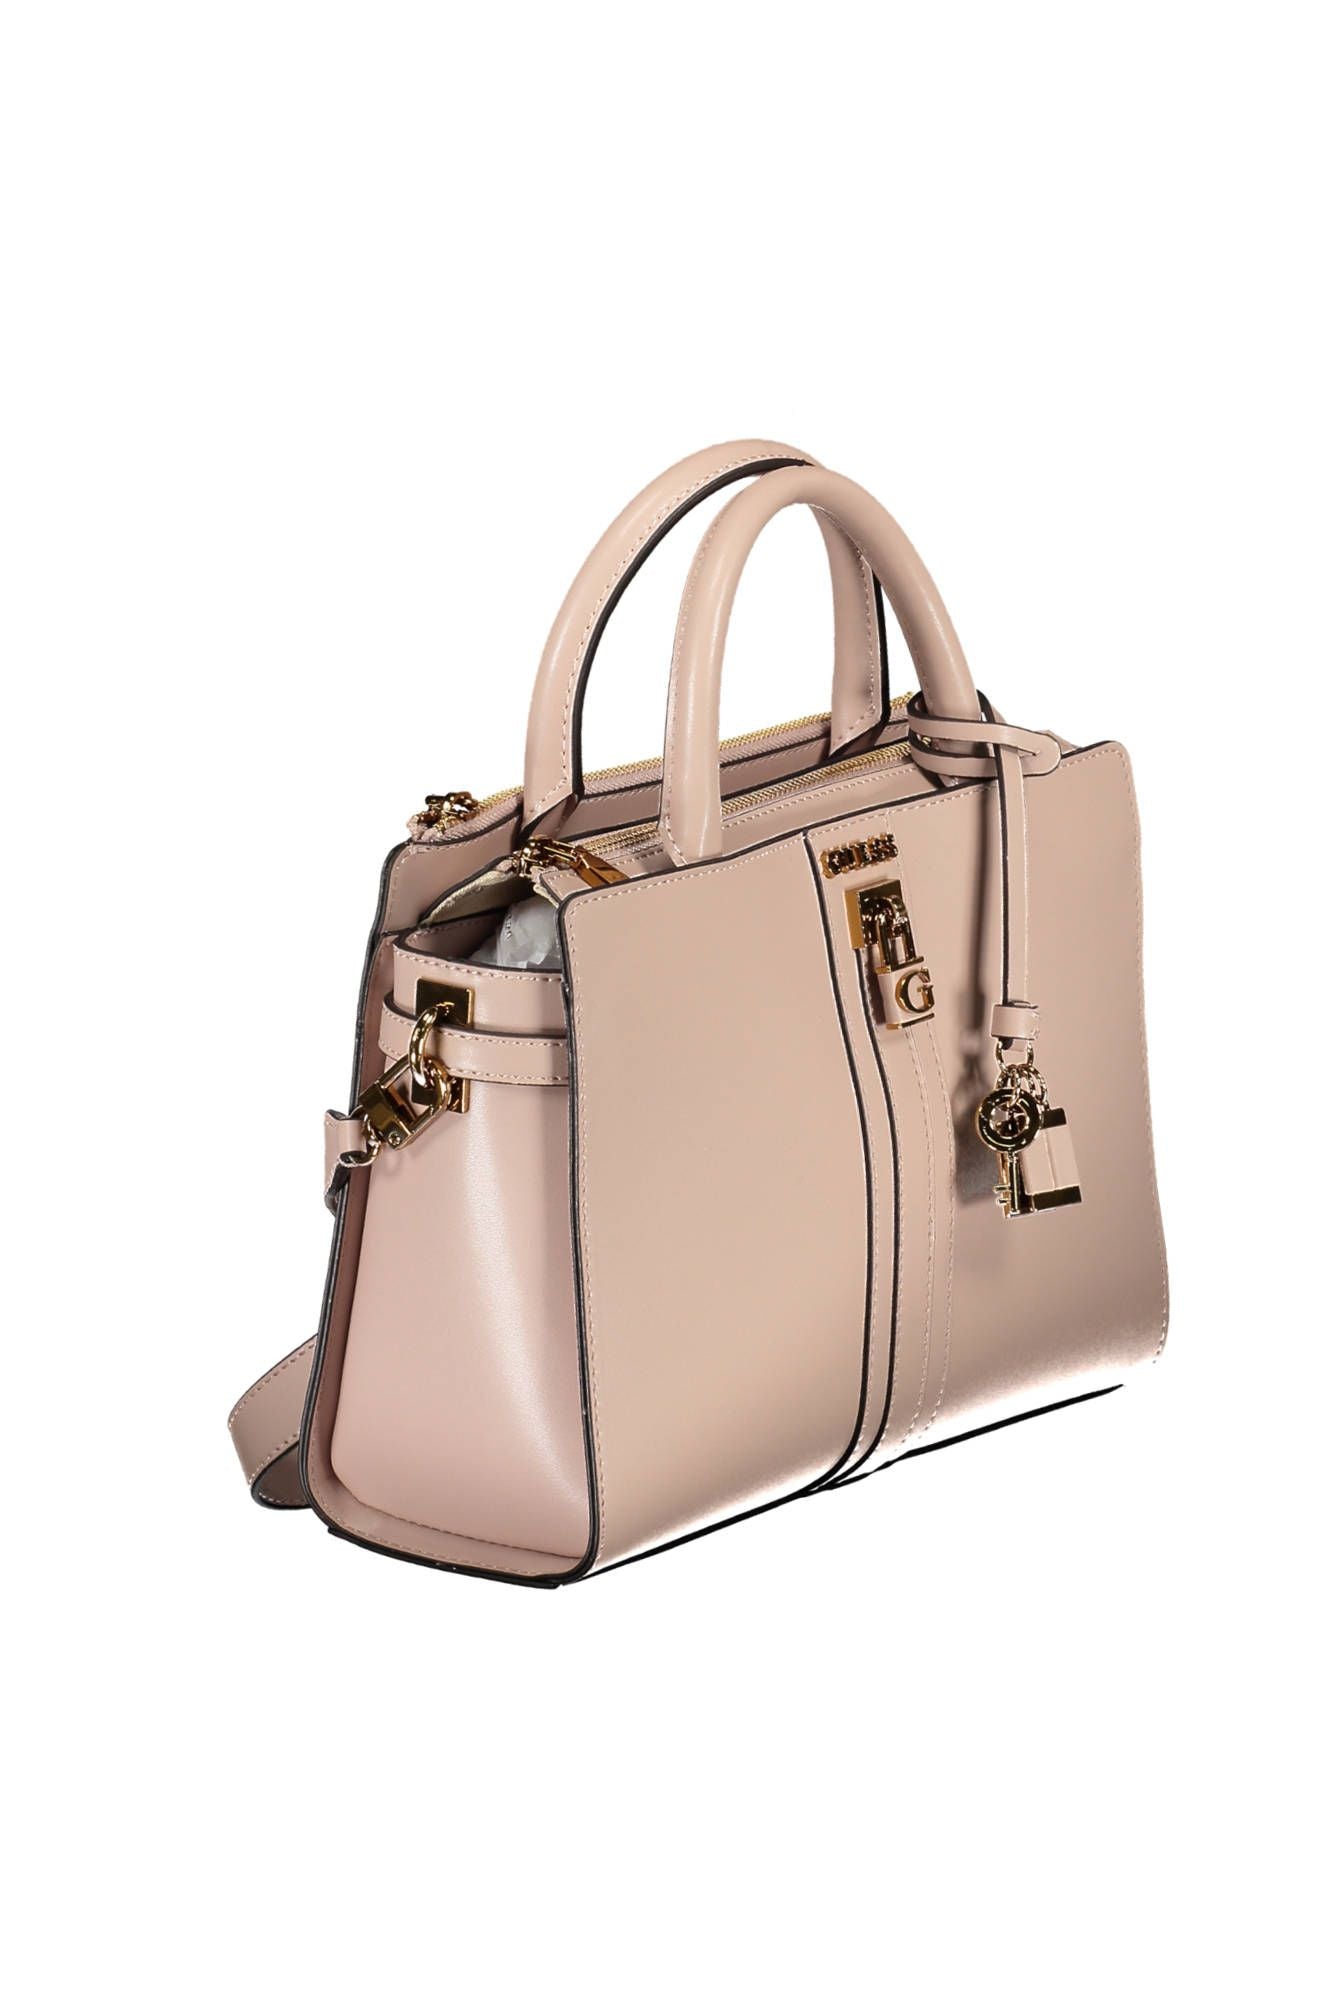 Chic Pink Guess Handbag with Contrasting Details